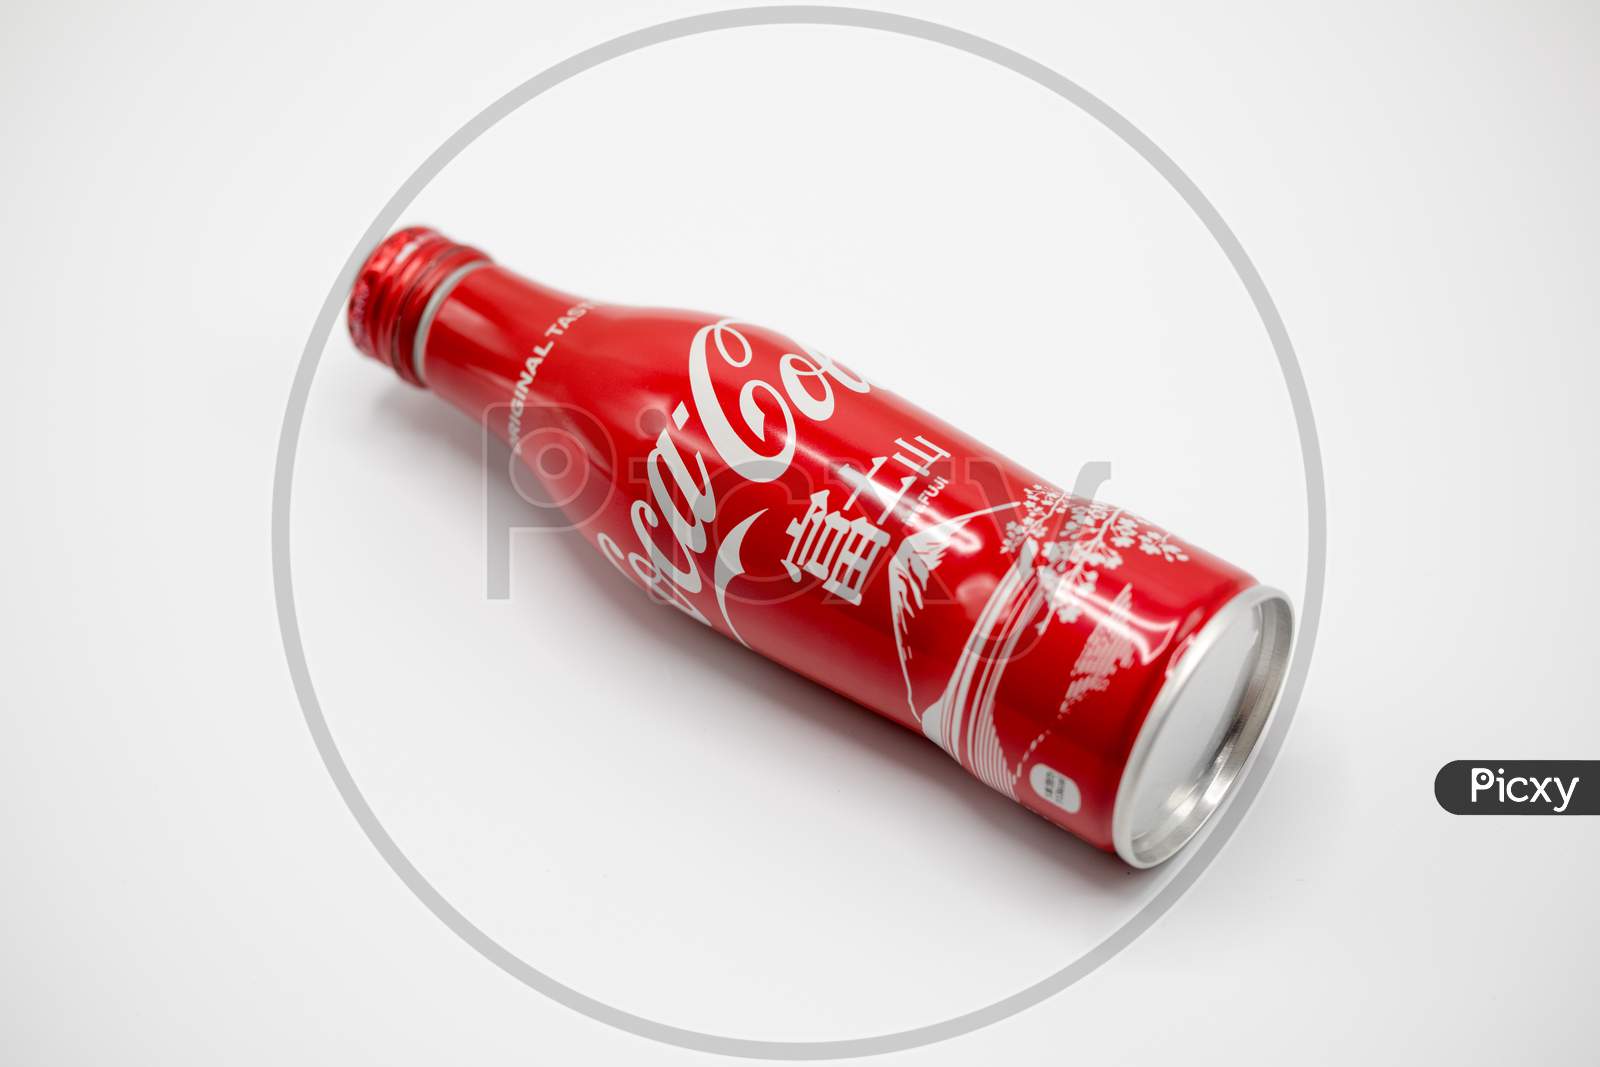 Coca-Cola Cool Drink Bottle on White Background